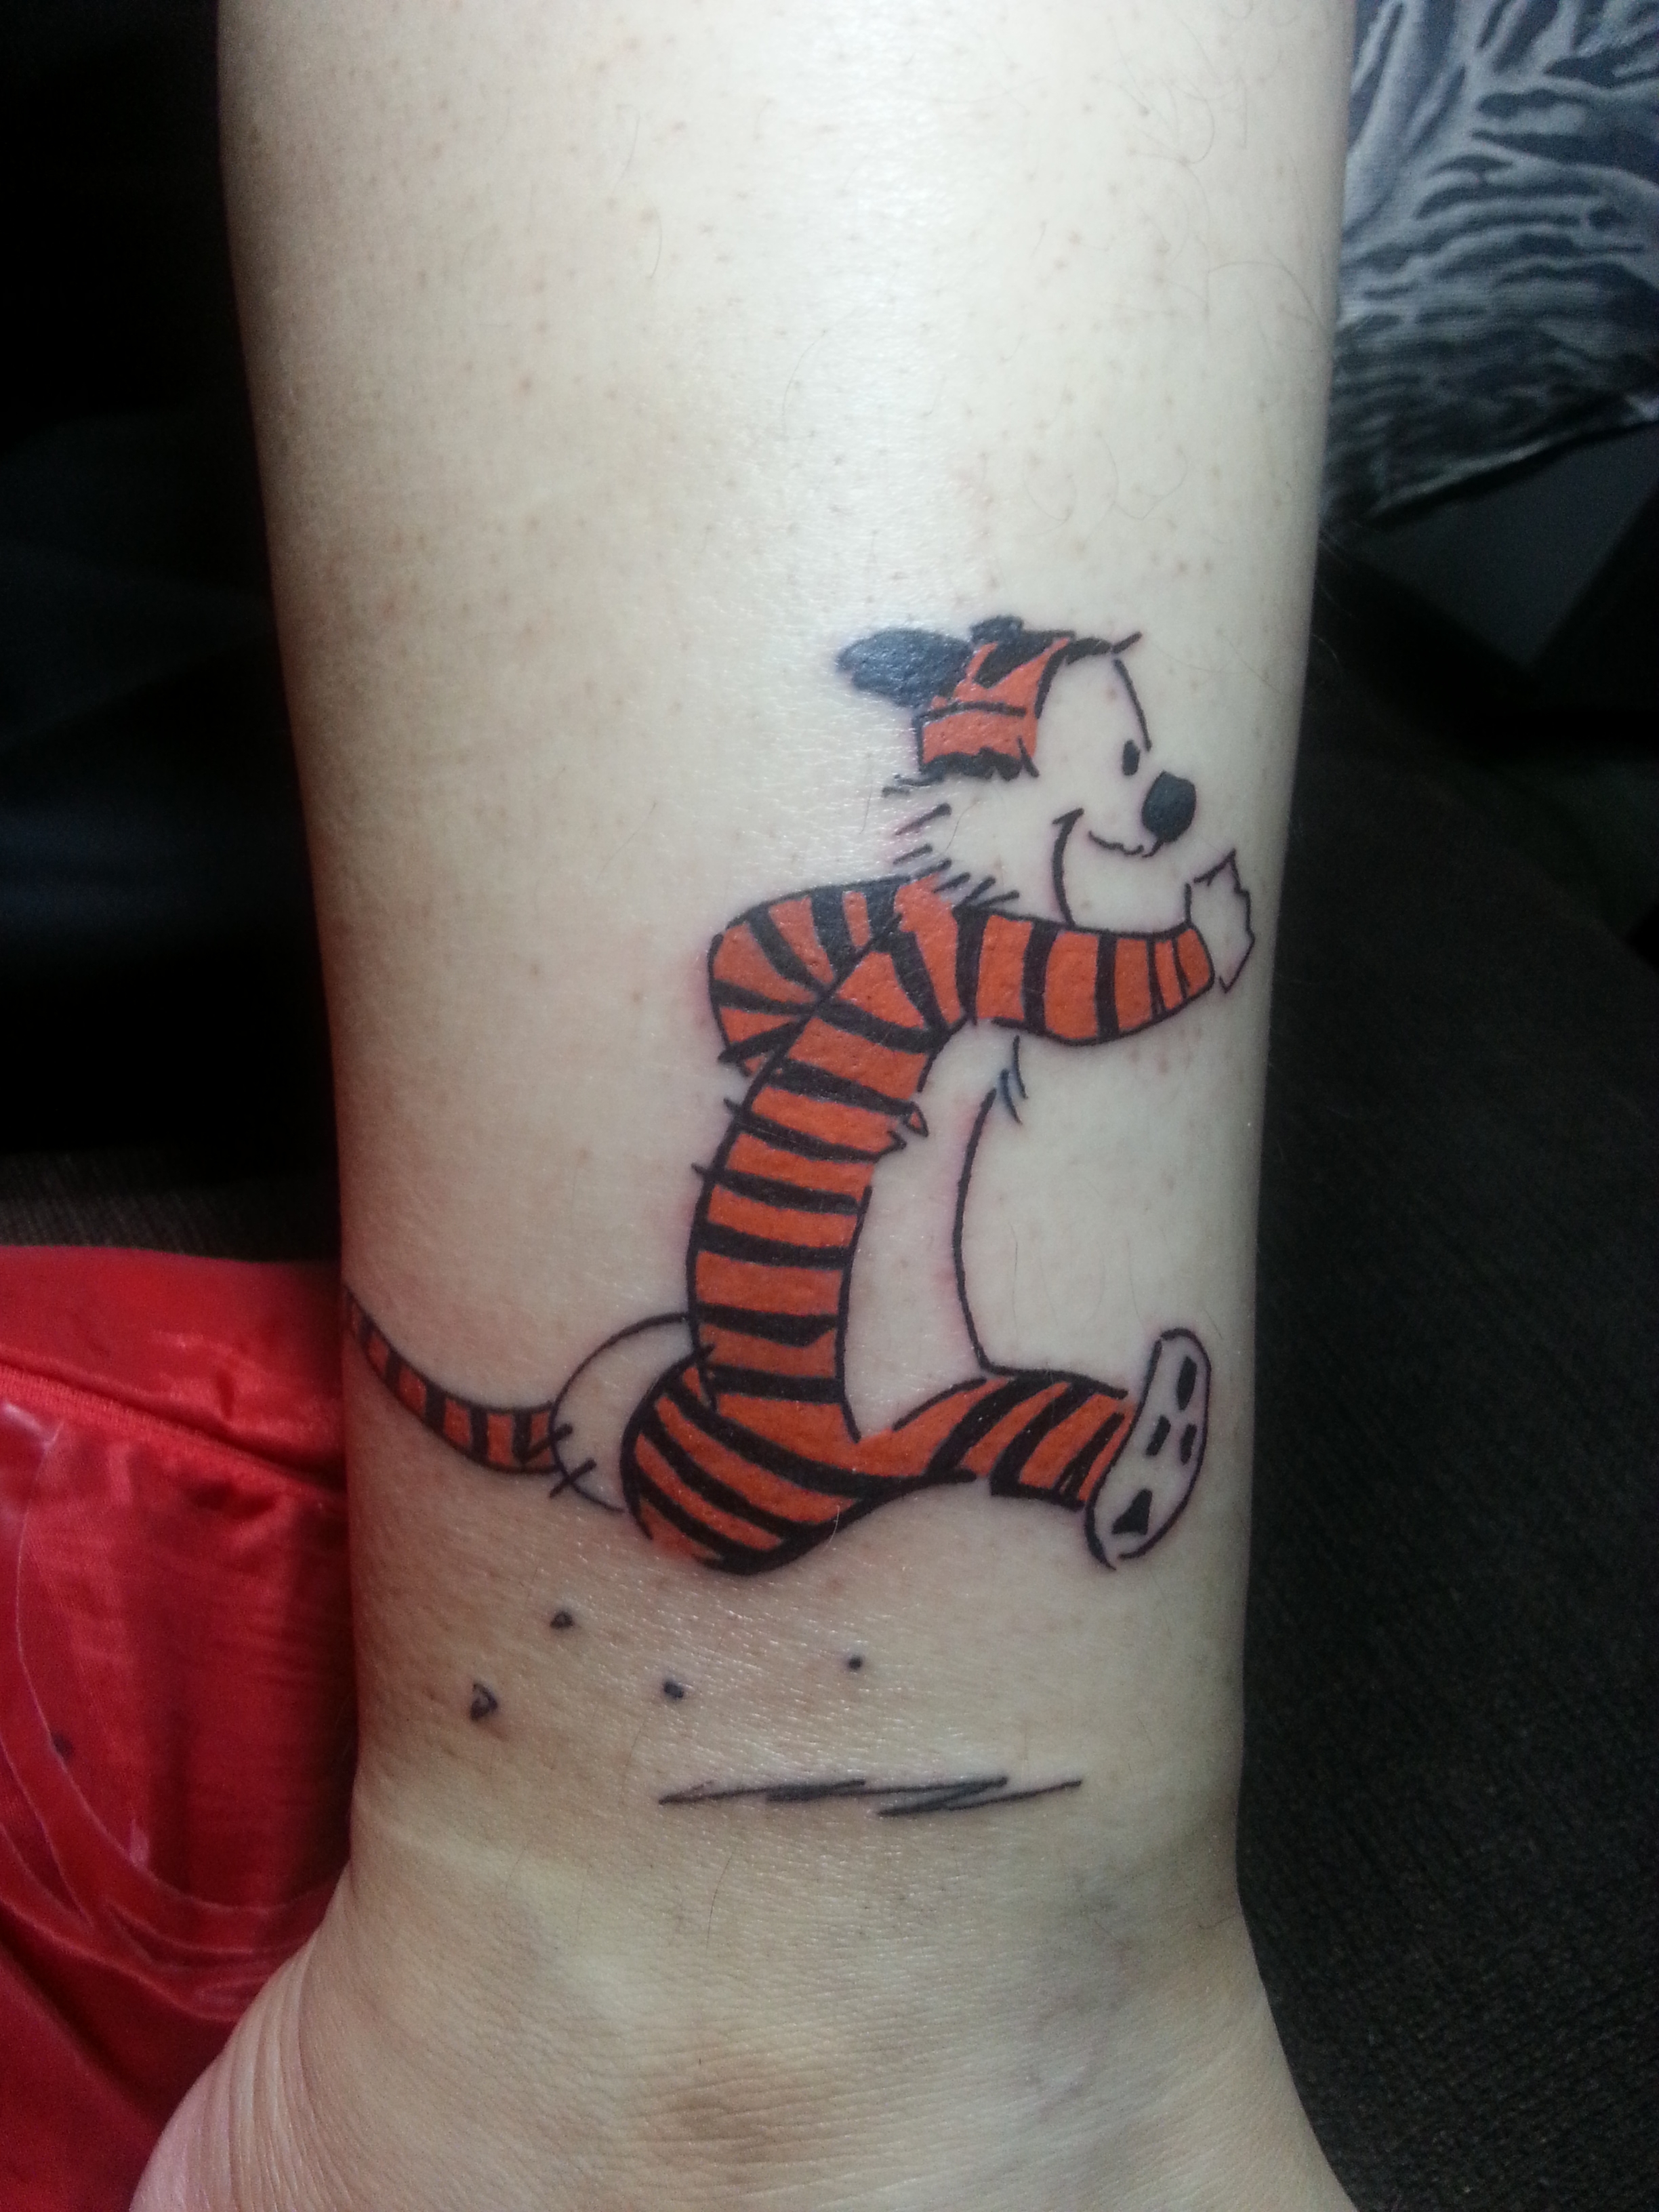 Ganns Likes: My New Hobbes tattoo (and Dave Suarez)